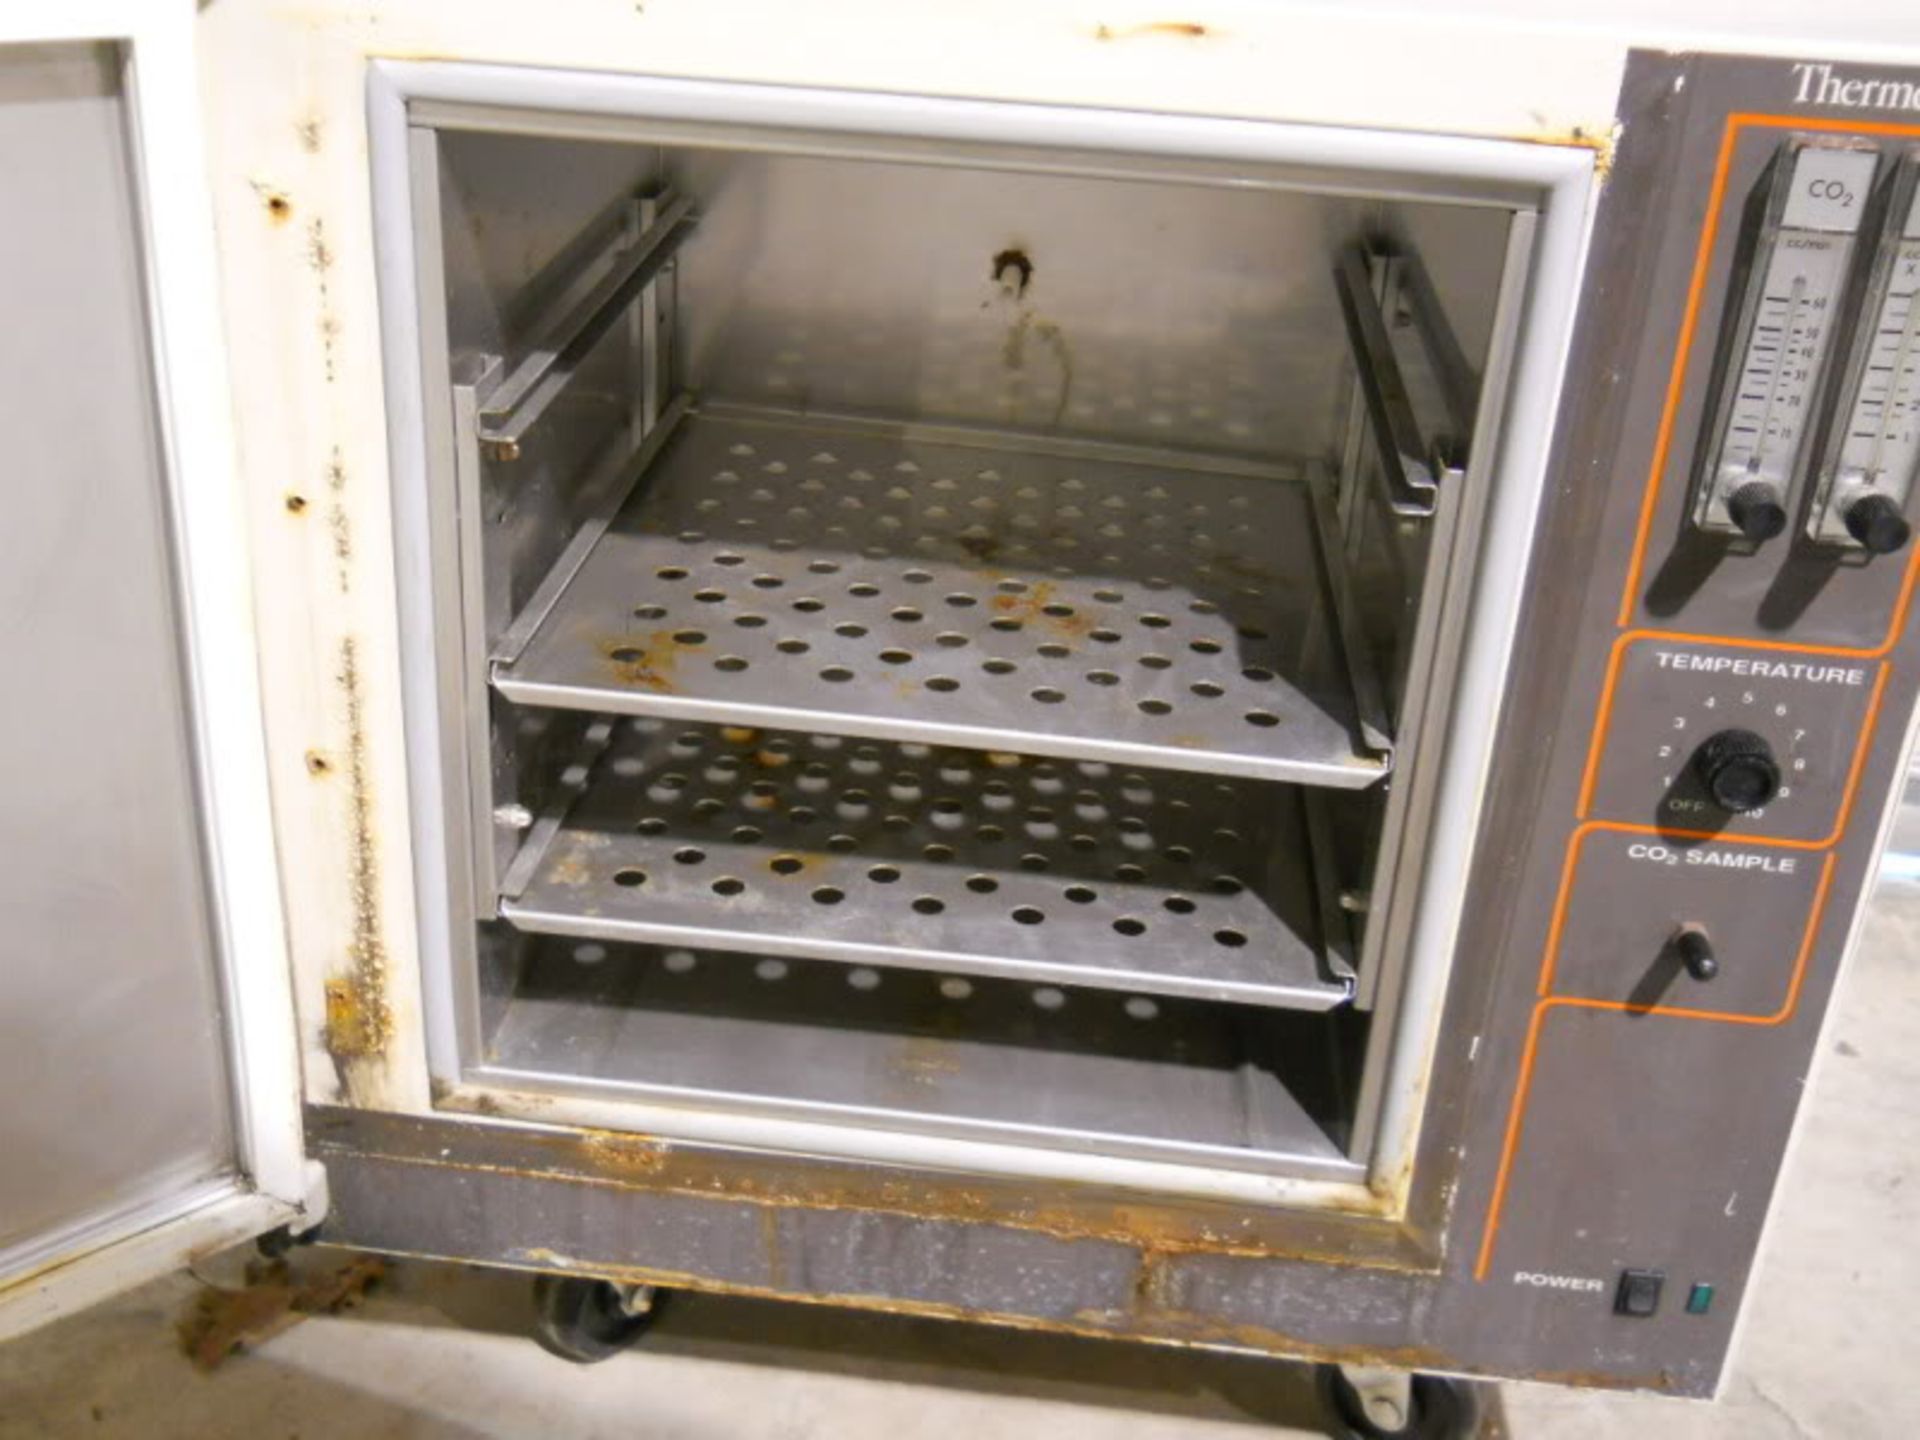 Thermolyne Compact Co2 Series 5000 Incubator oven Model I53325, Qty 1, 221501278593 - Image 9 of 9